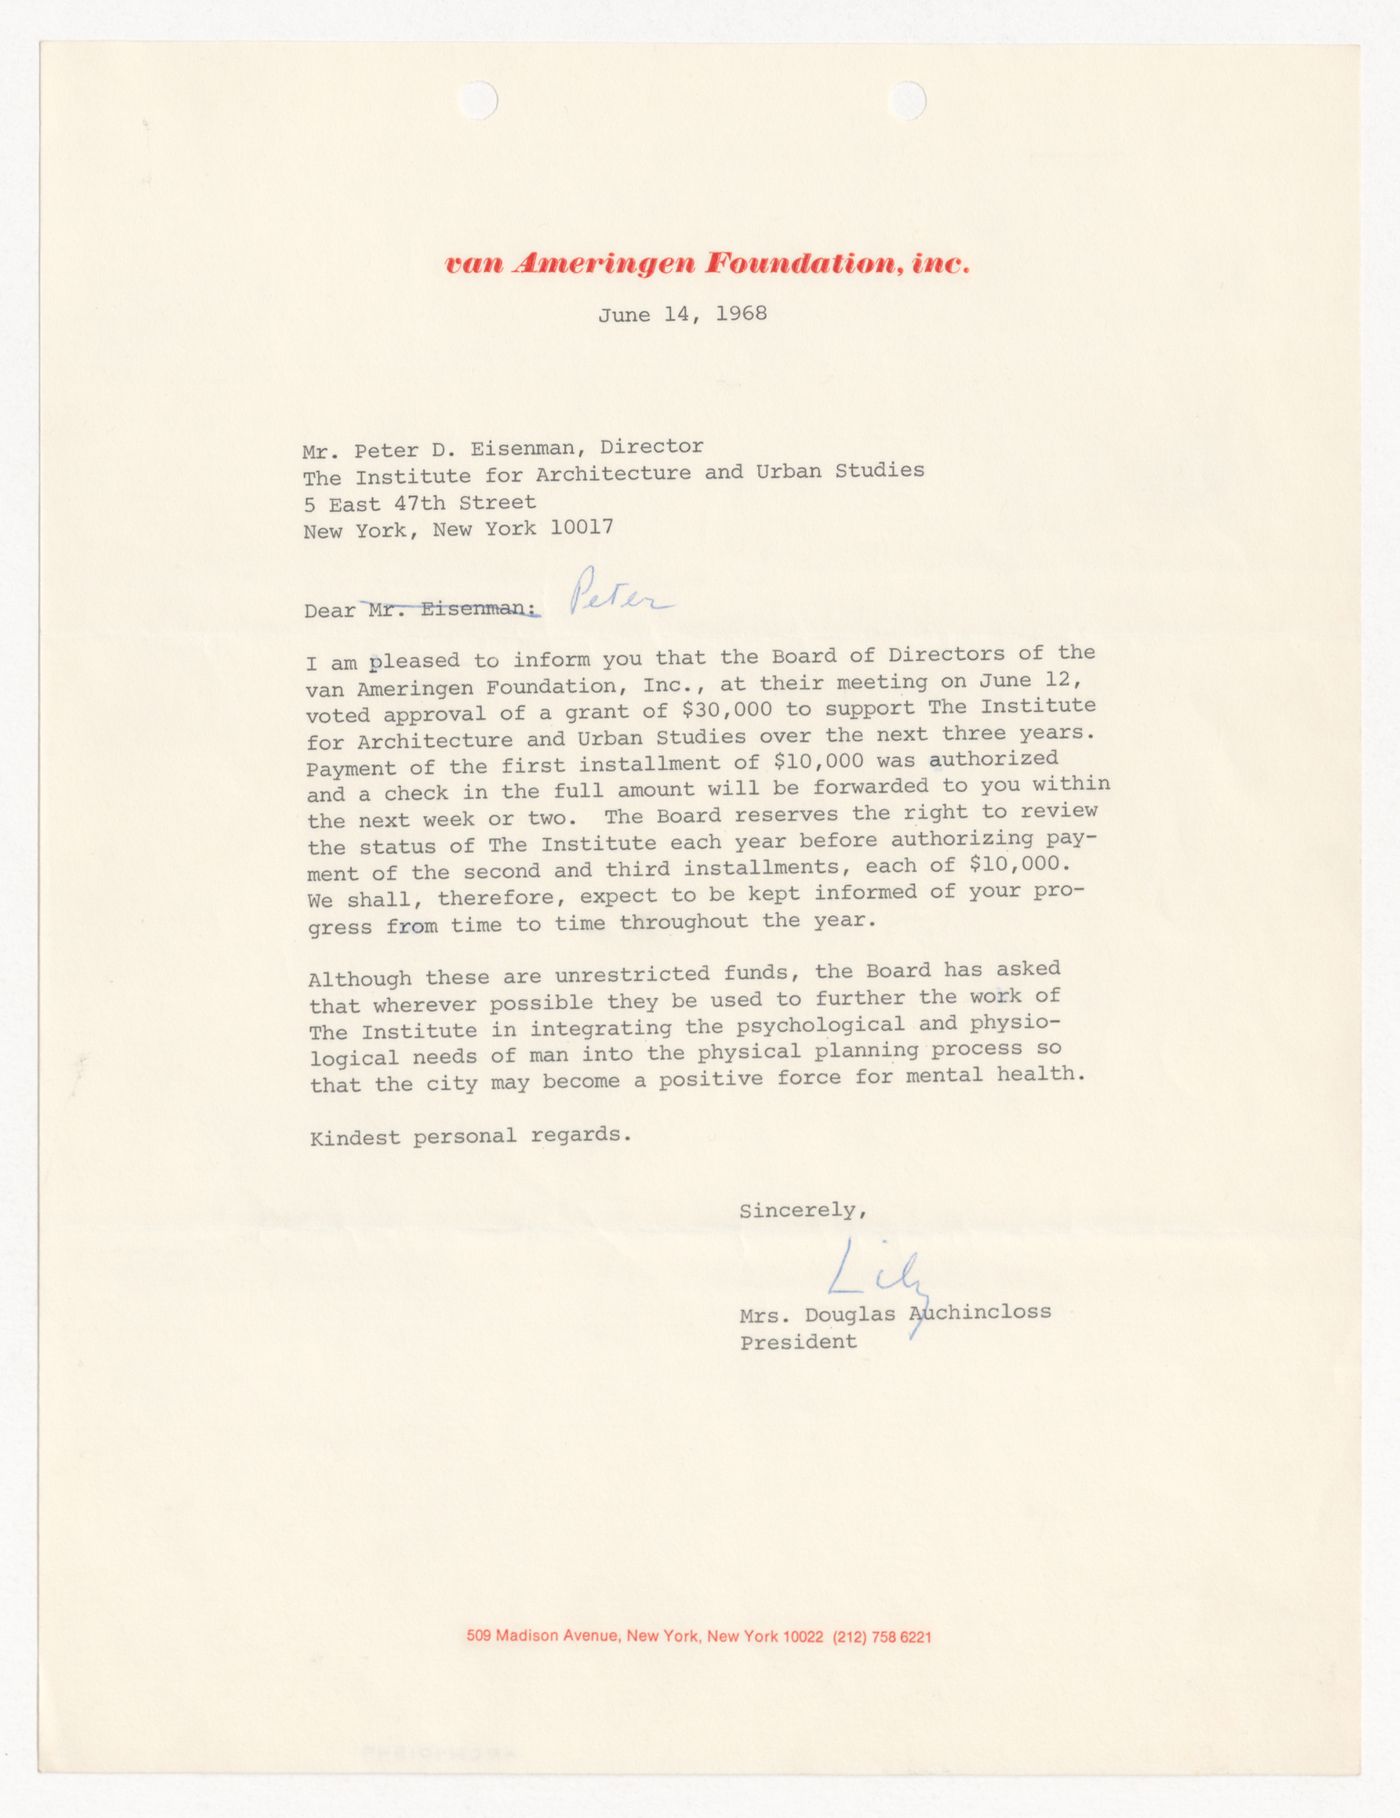 Letter from Mrs. Douglas Auchincloss to Peter D. Eisenman about a grant awarded by the van Ameringen Foundation